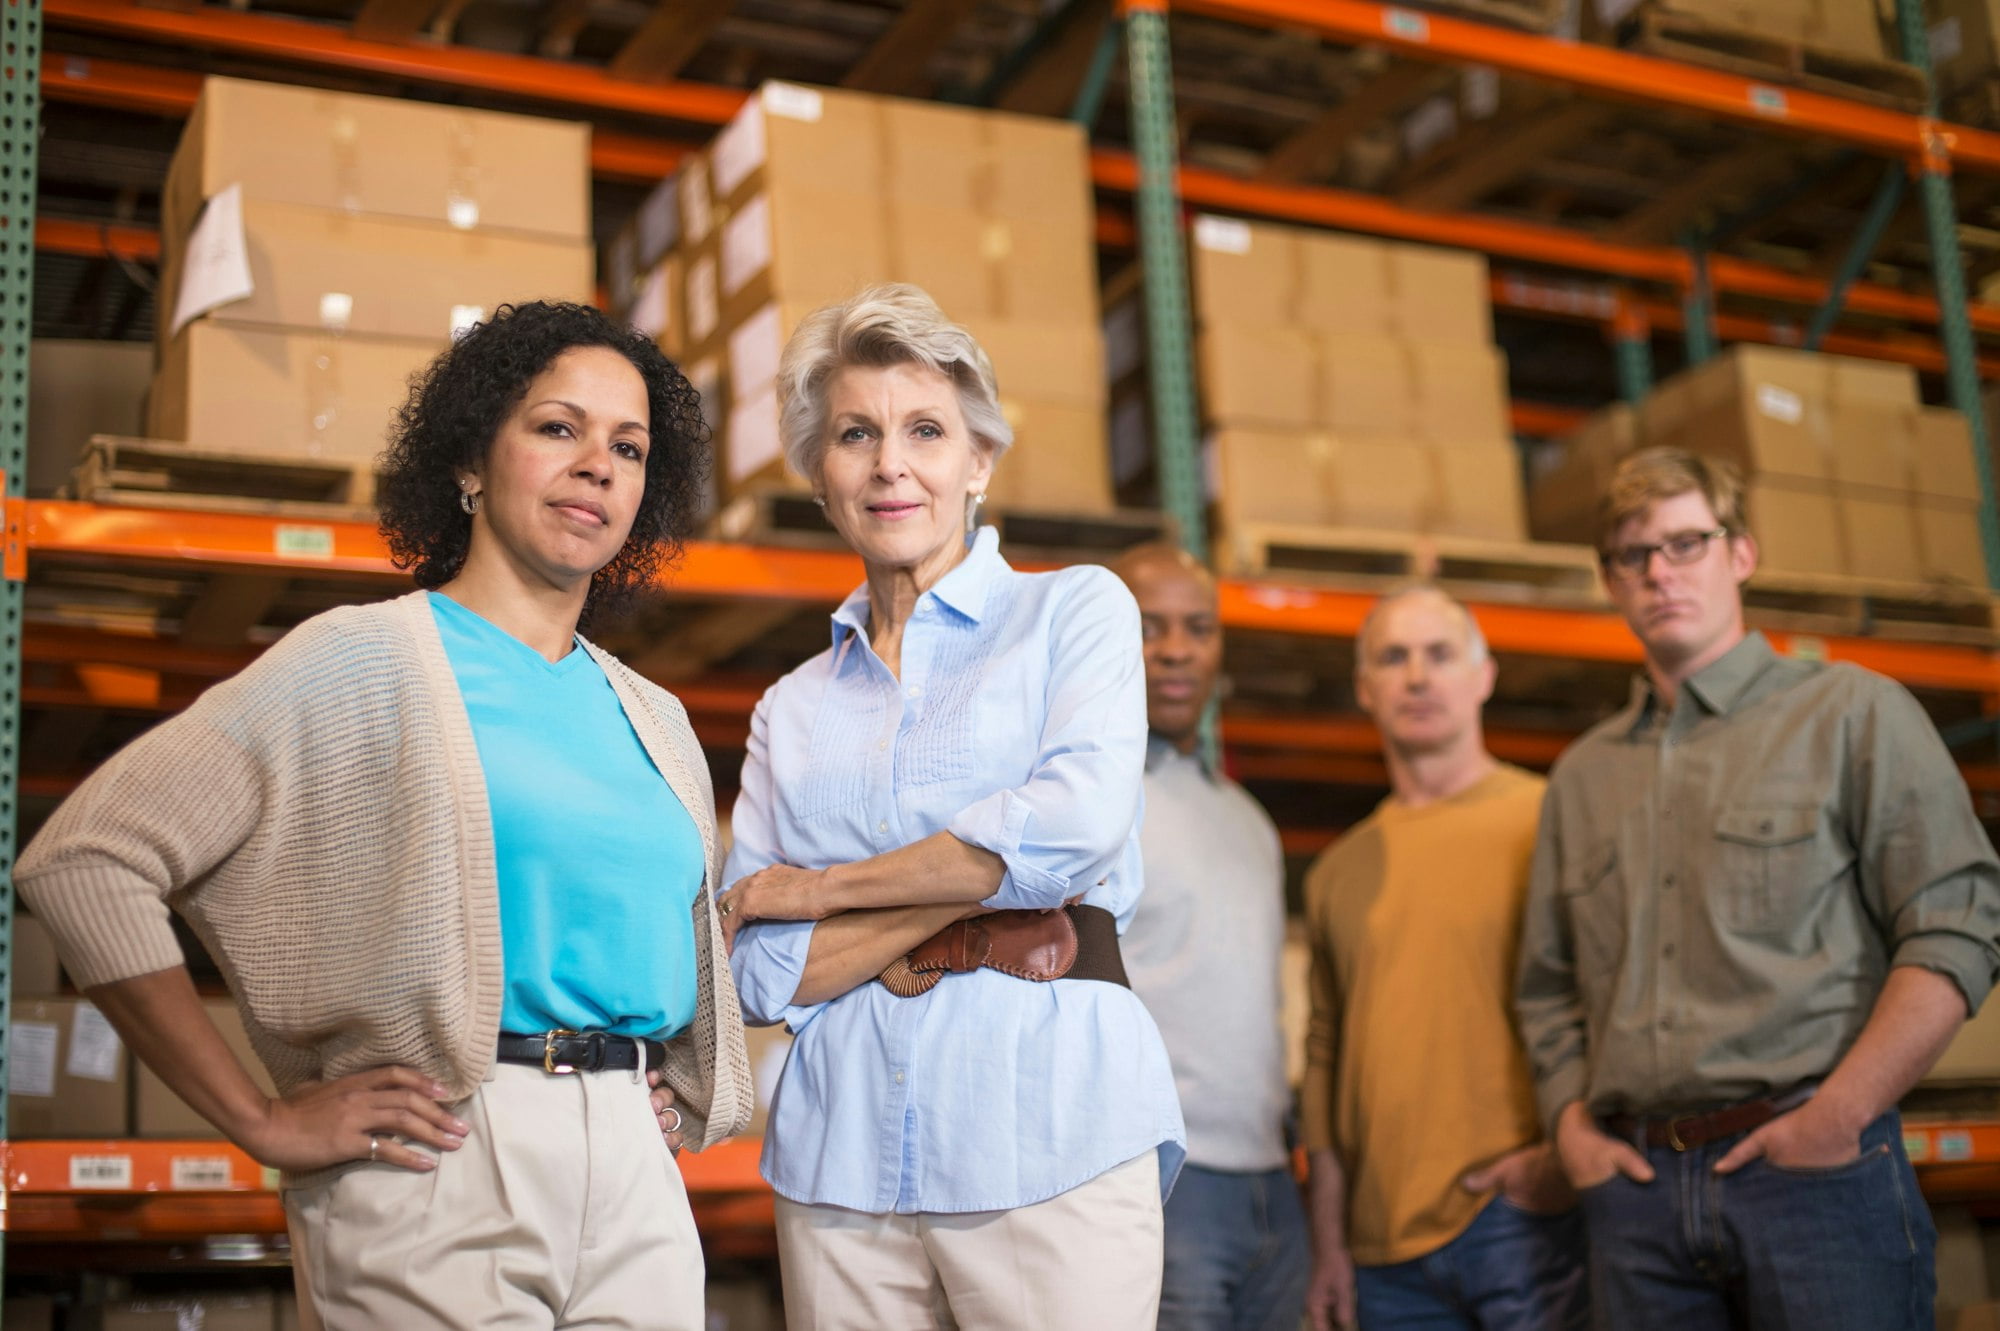 Portrait of warehouse workers in front of boxes